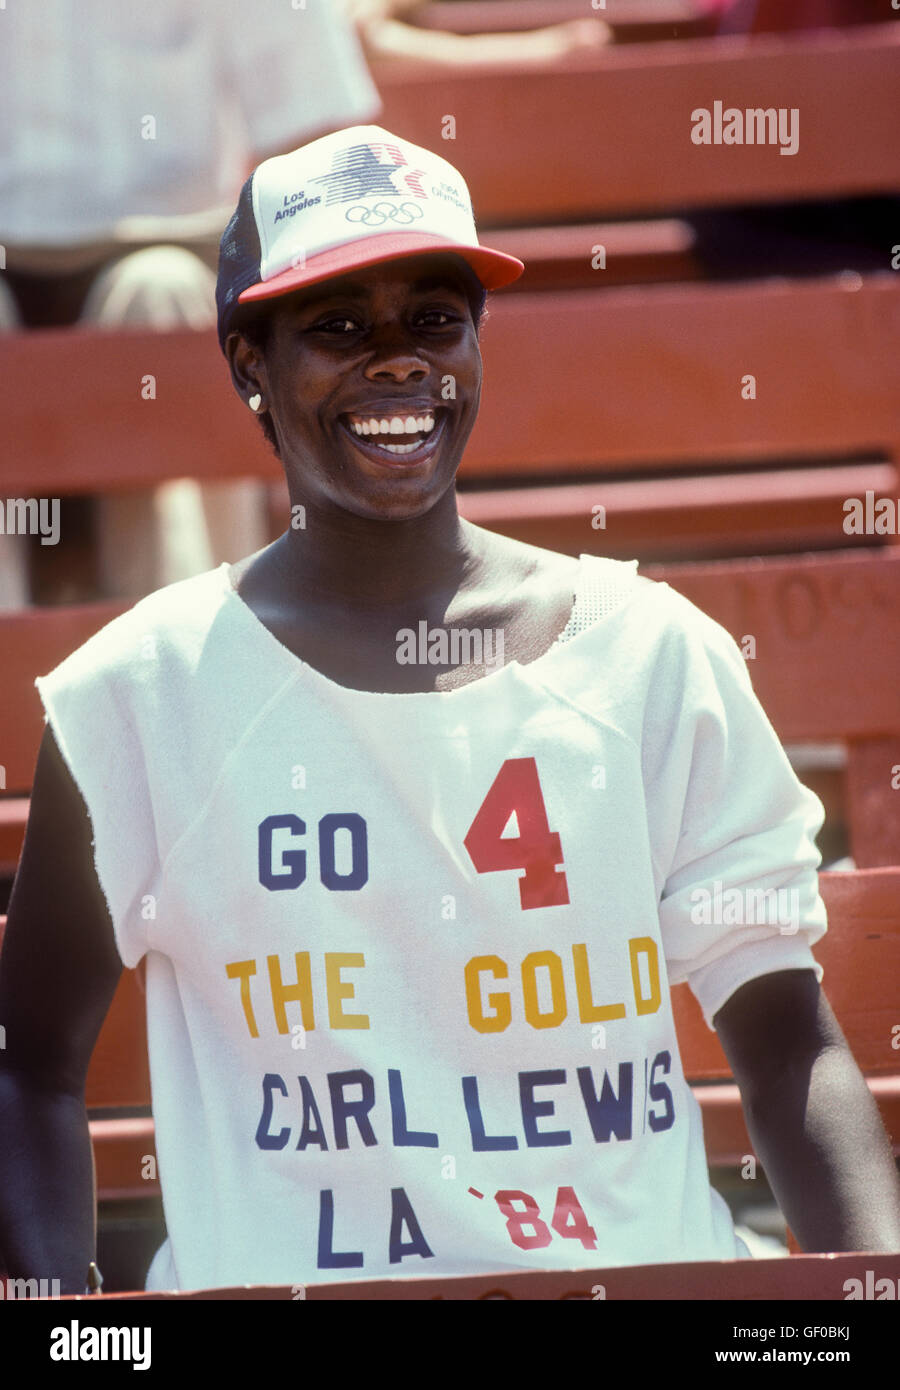 American fan rooting for Carl Lewis at L.A. Memorial Coliseum during 1984 Olympic Games in Los Angeles. Stock Photo